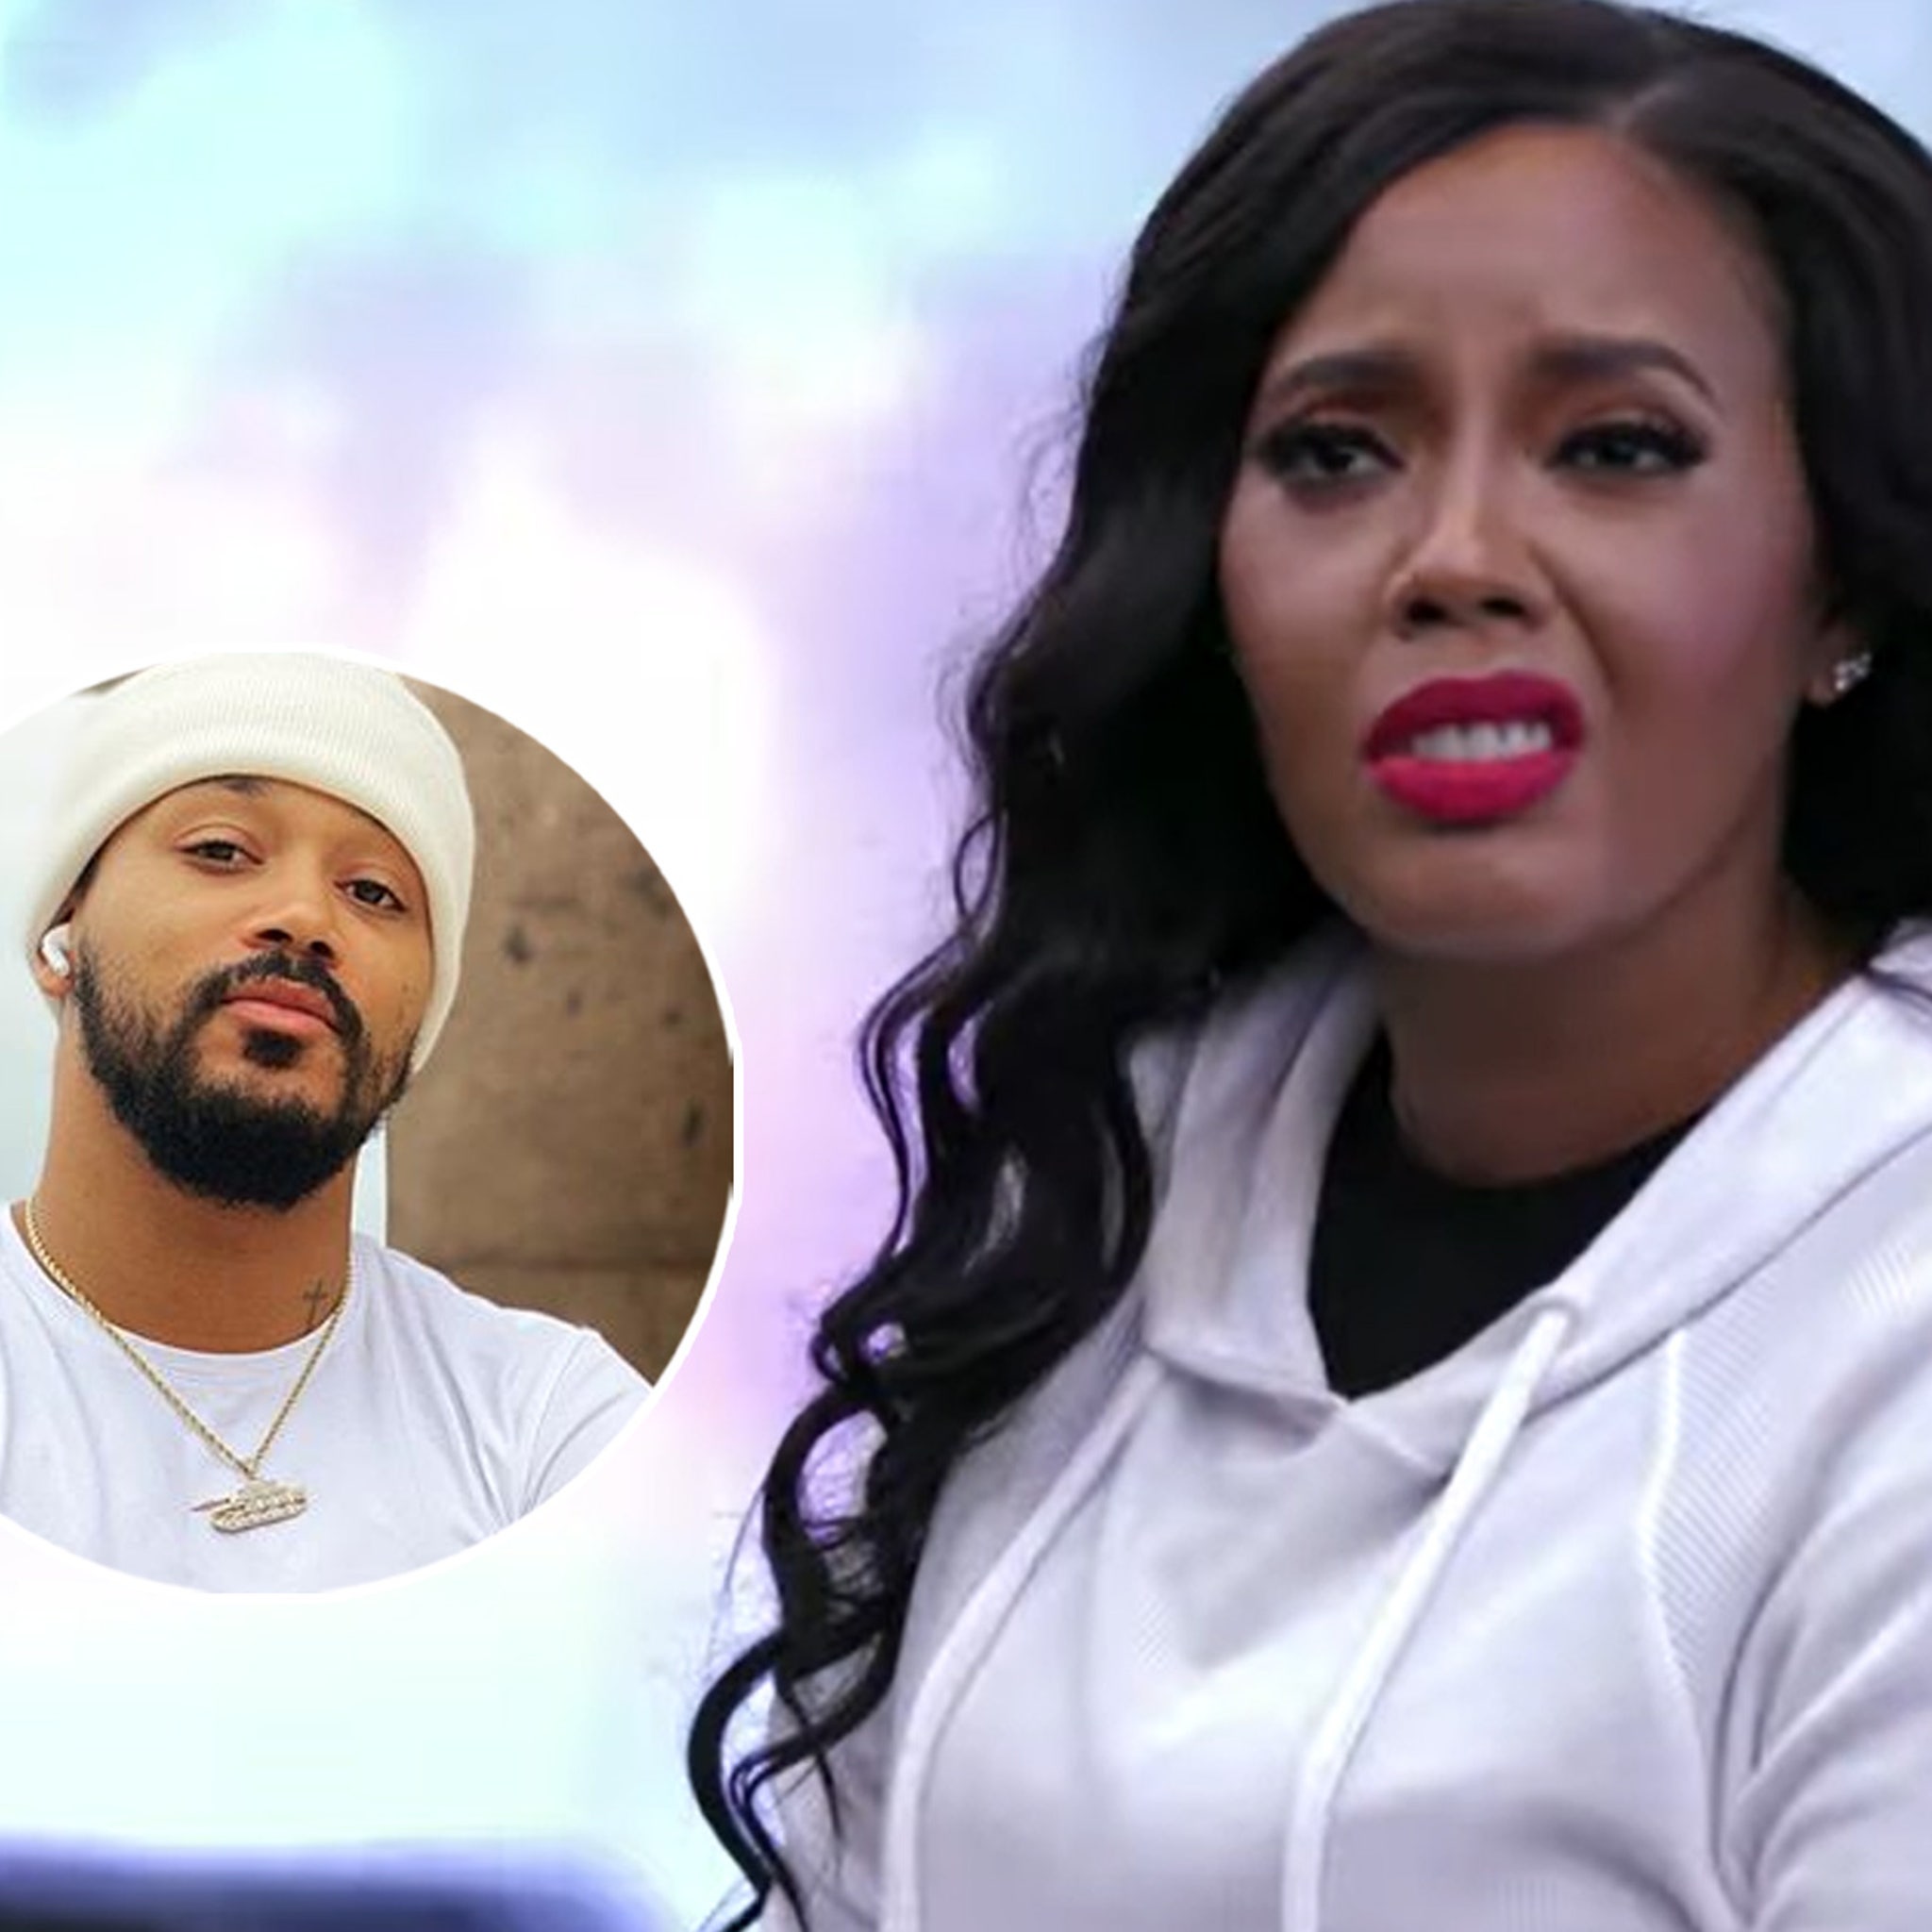 Growing Up Hip Hop: Angela Reacts to Romeo Quitting the Show